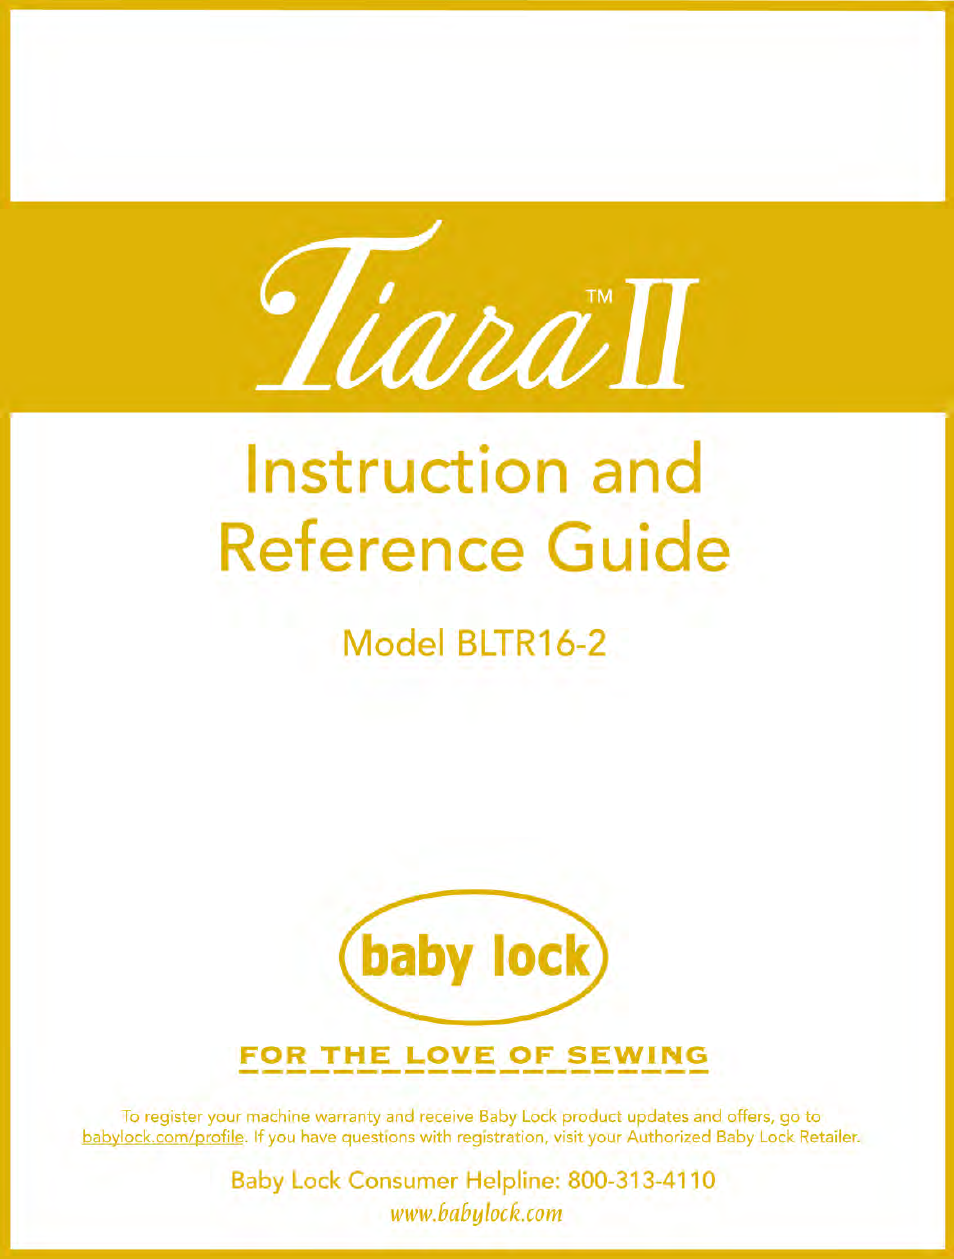 Tiara II (BLTR16-2) Instruction and Reference Guide